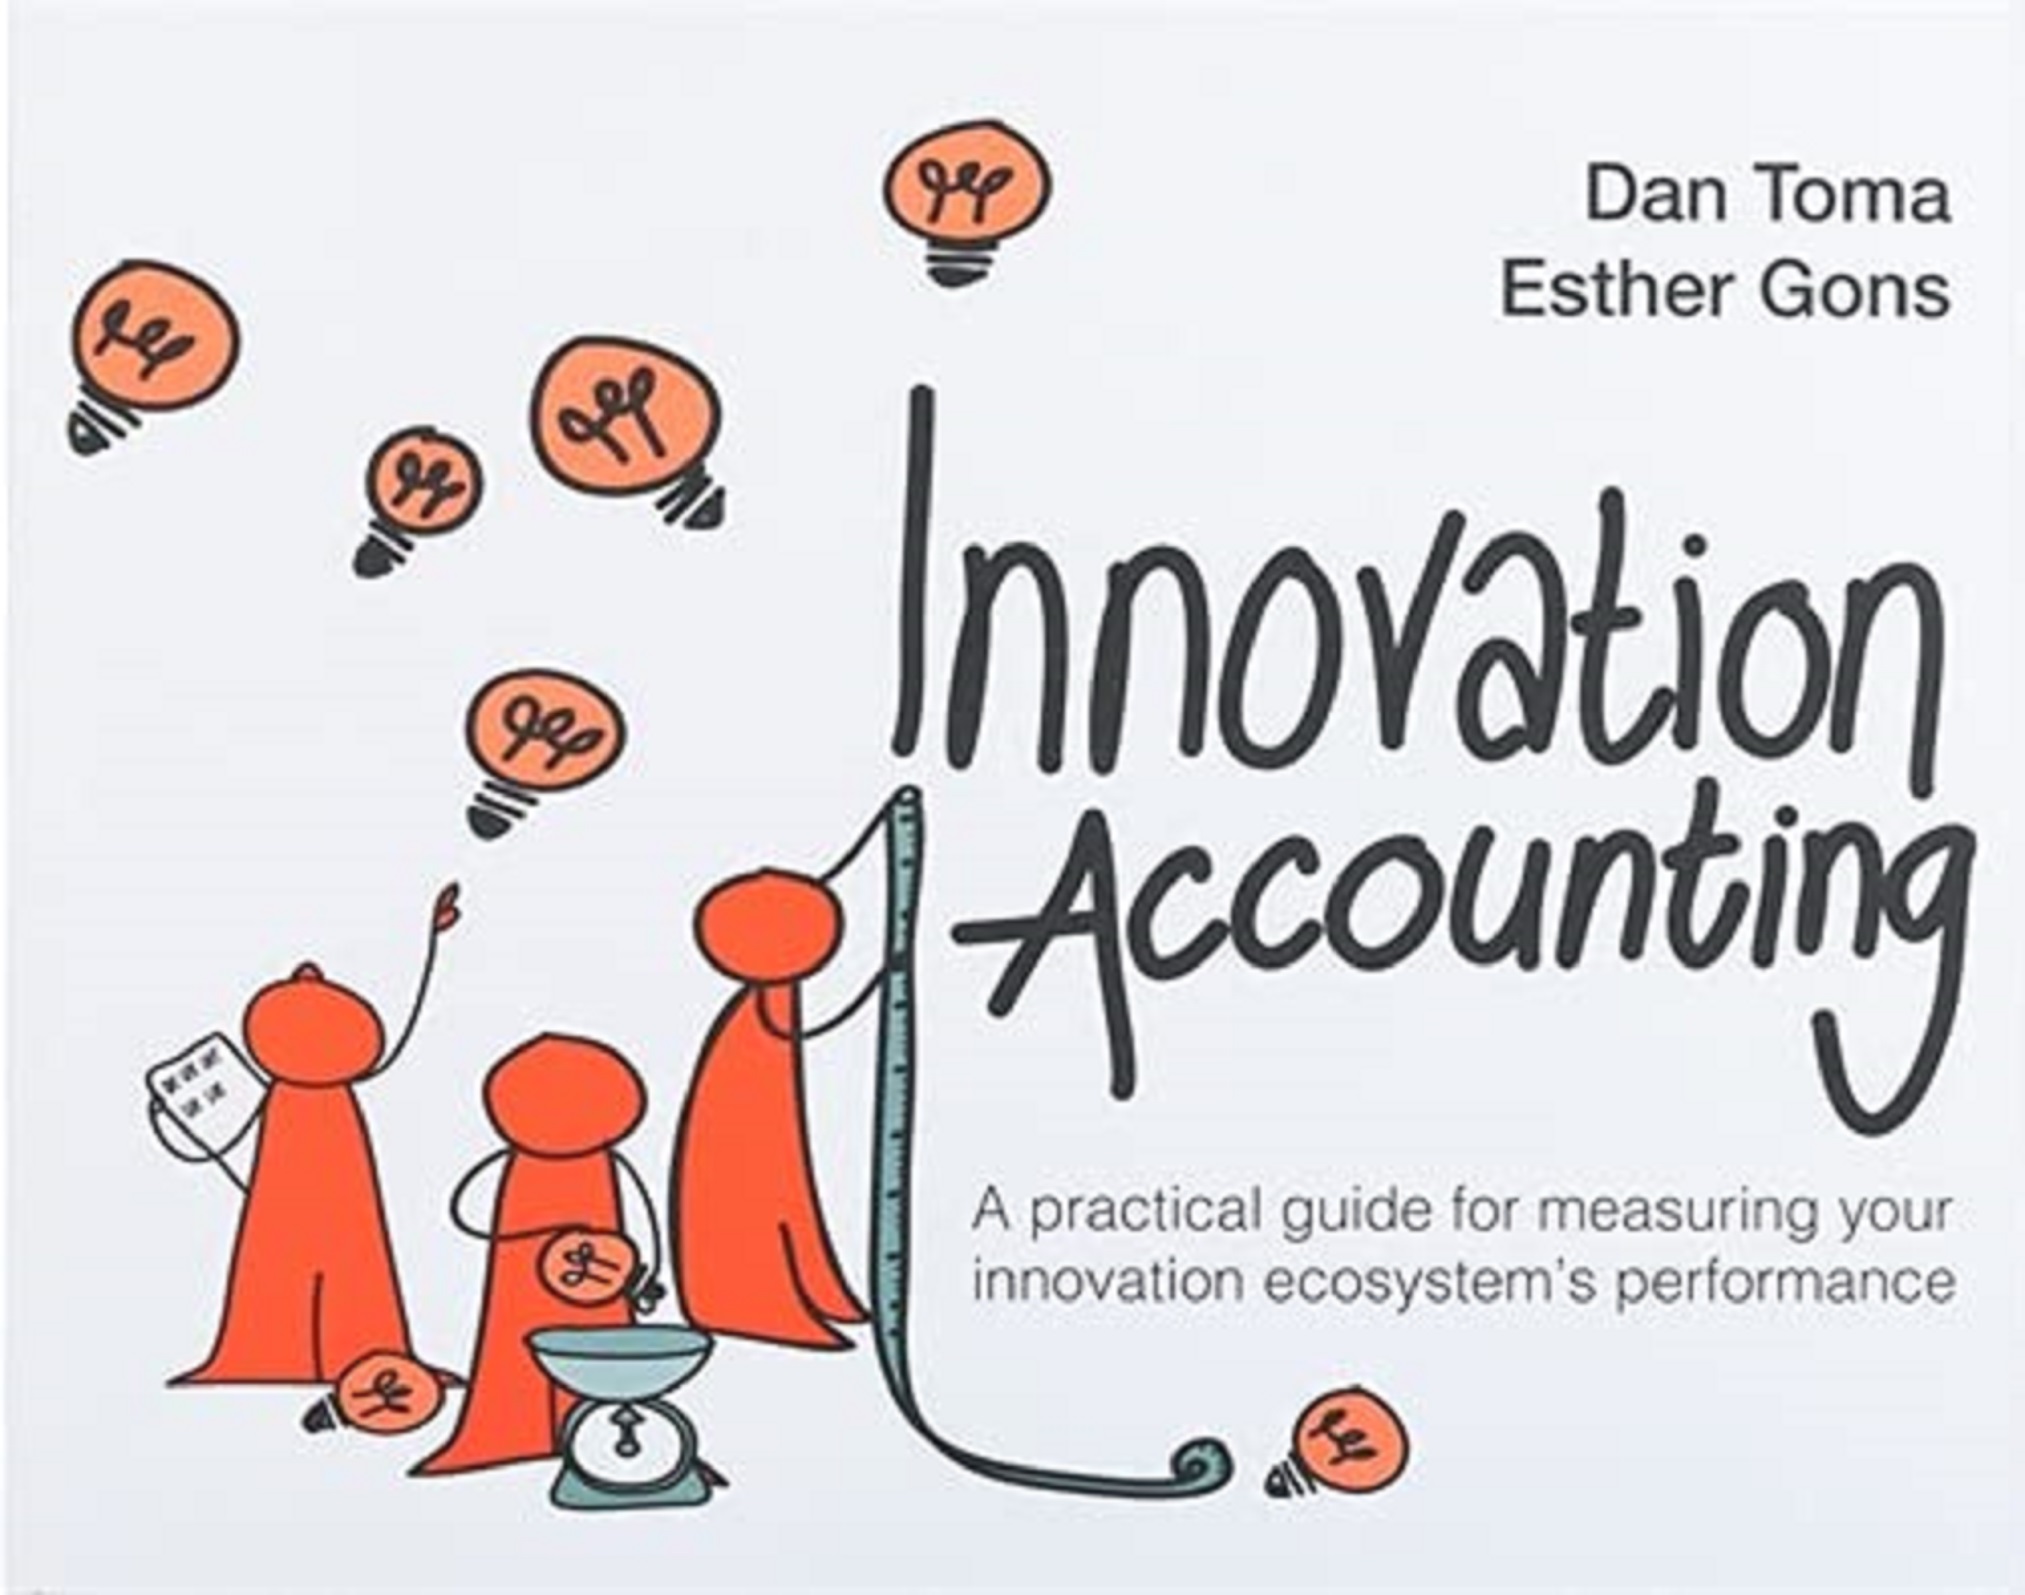 Innovation Accounting | Dan Toma, Esther Gons